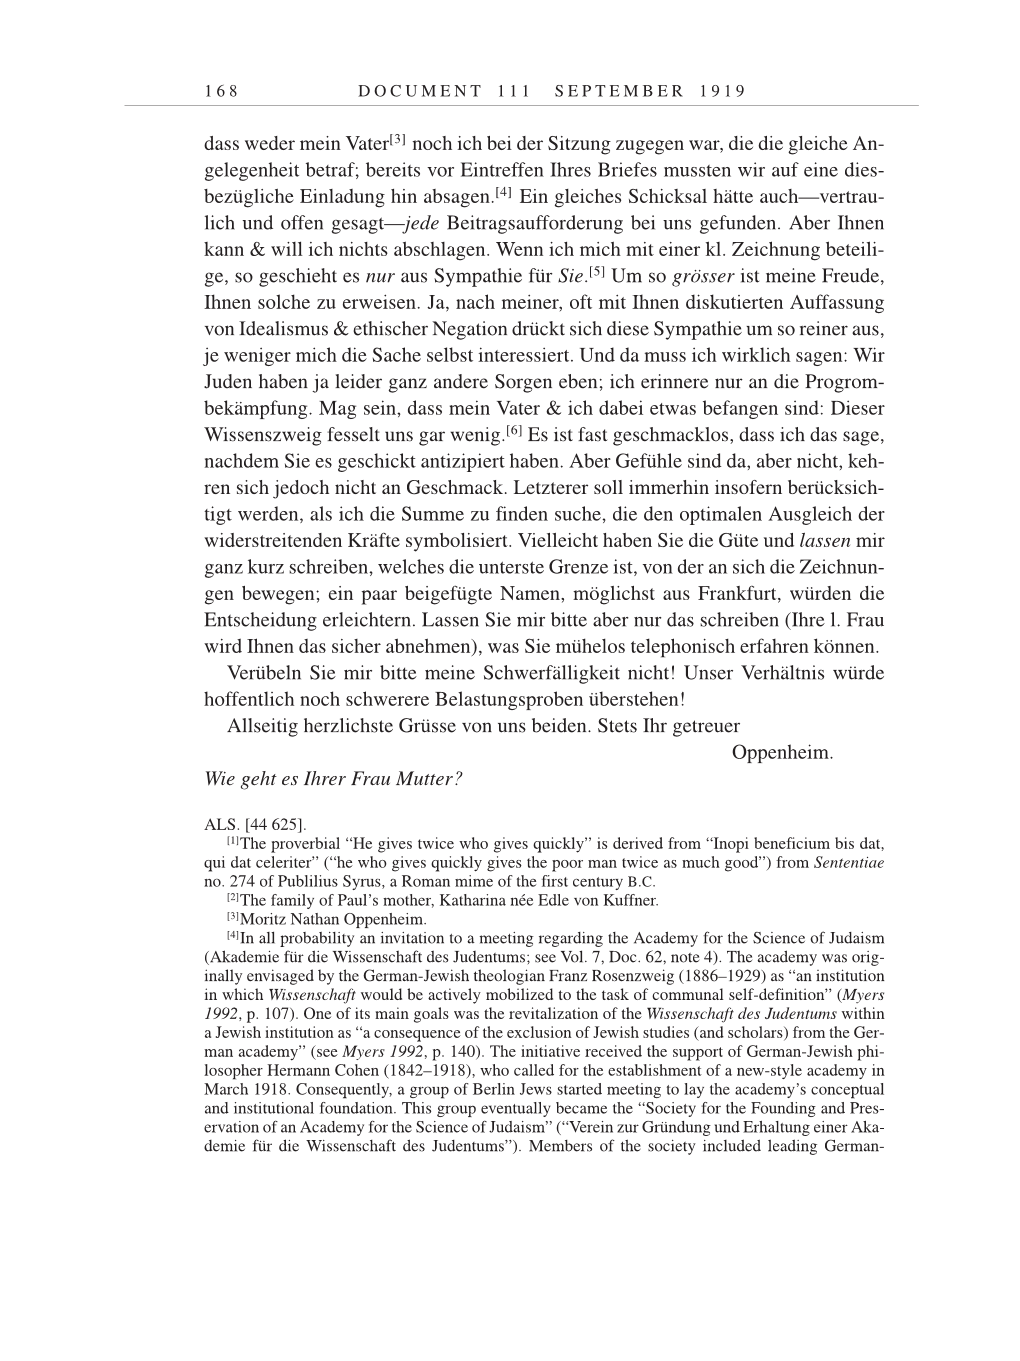 Volume 9: The Berlin Years: Correspondence January 1919-April 1920 page 168